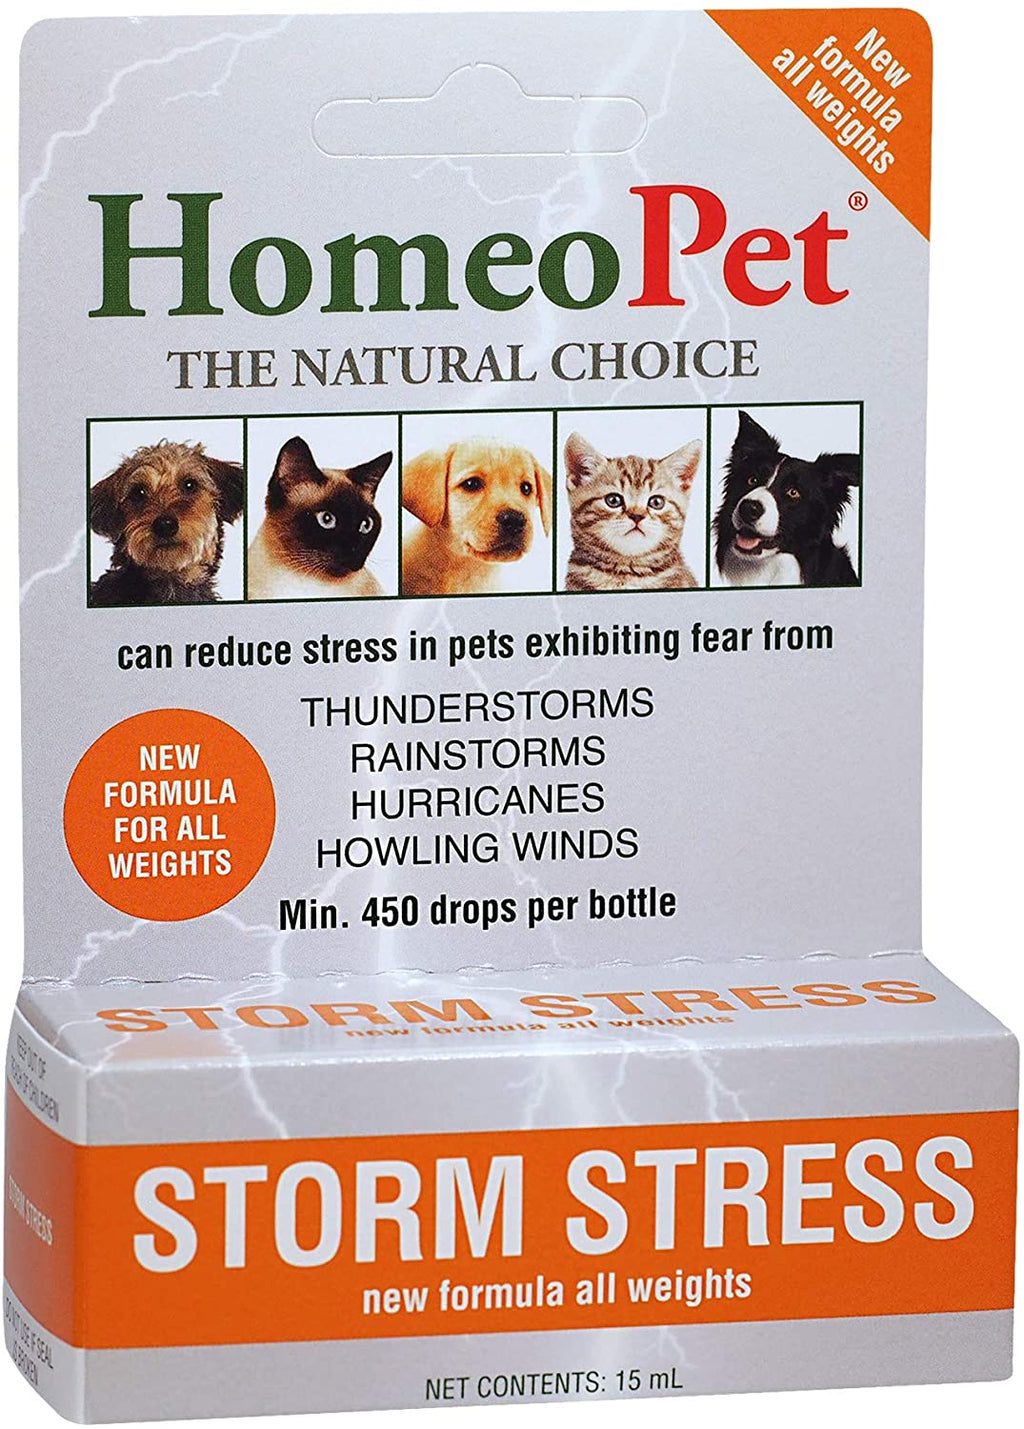 HomeoPet Storm Stress K-9 All Breeds Dog First Aid Care - 5 ml  